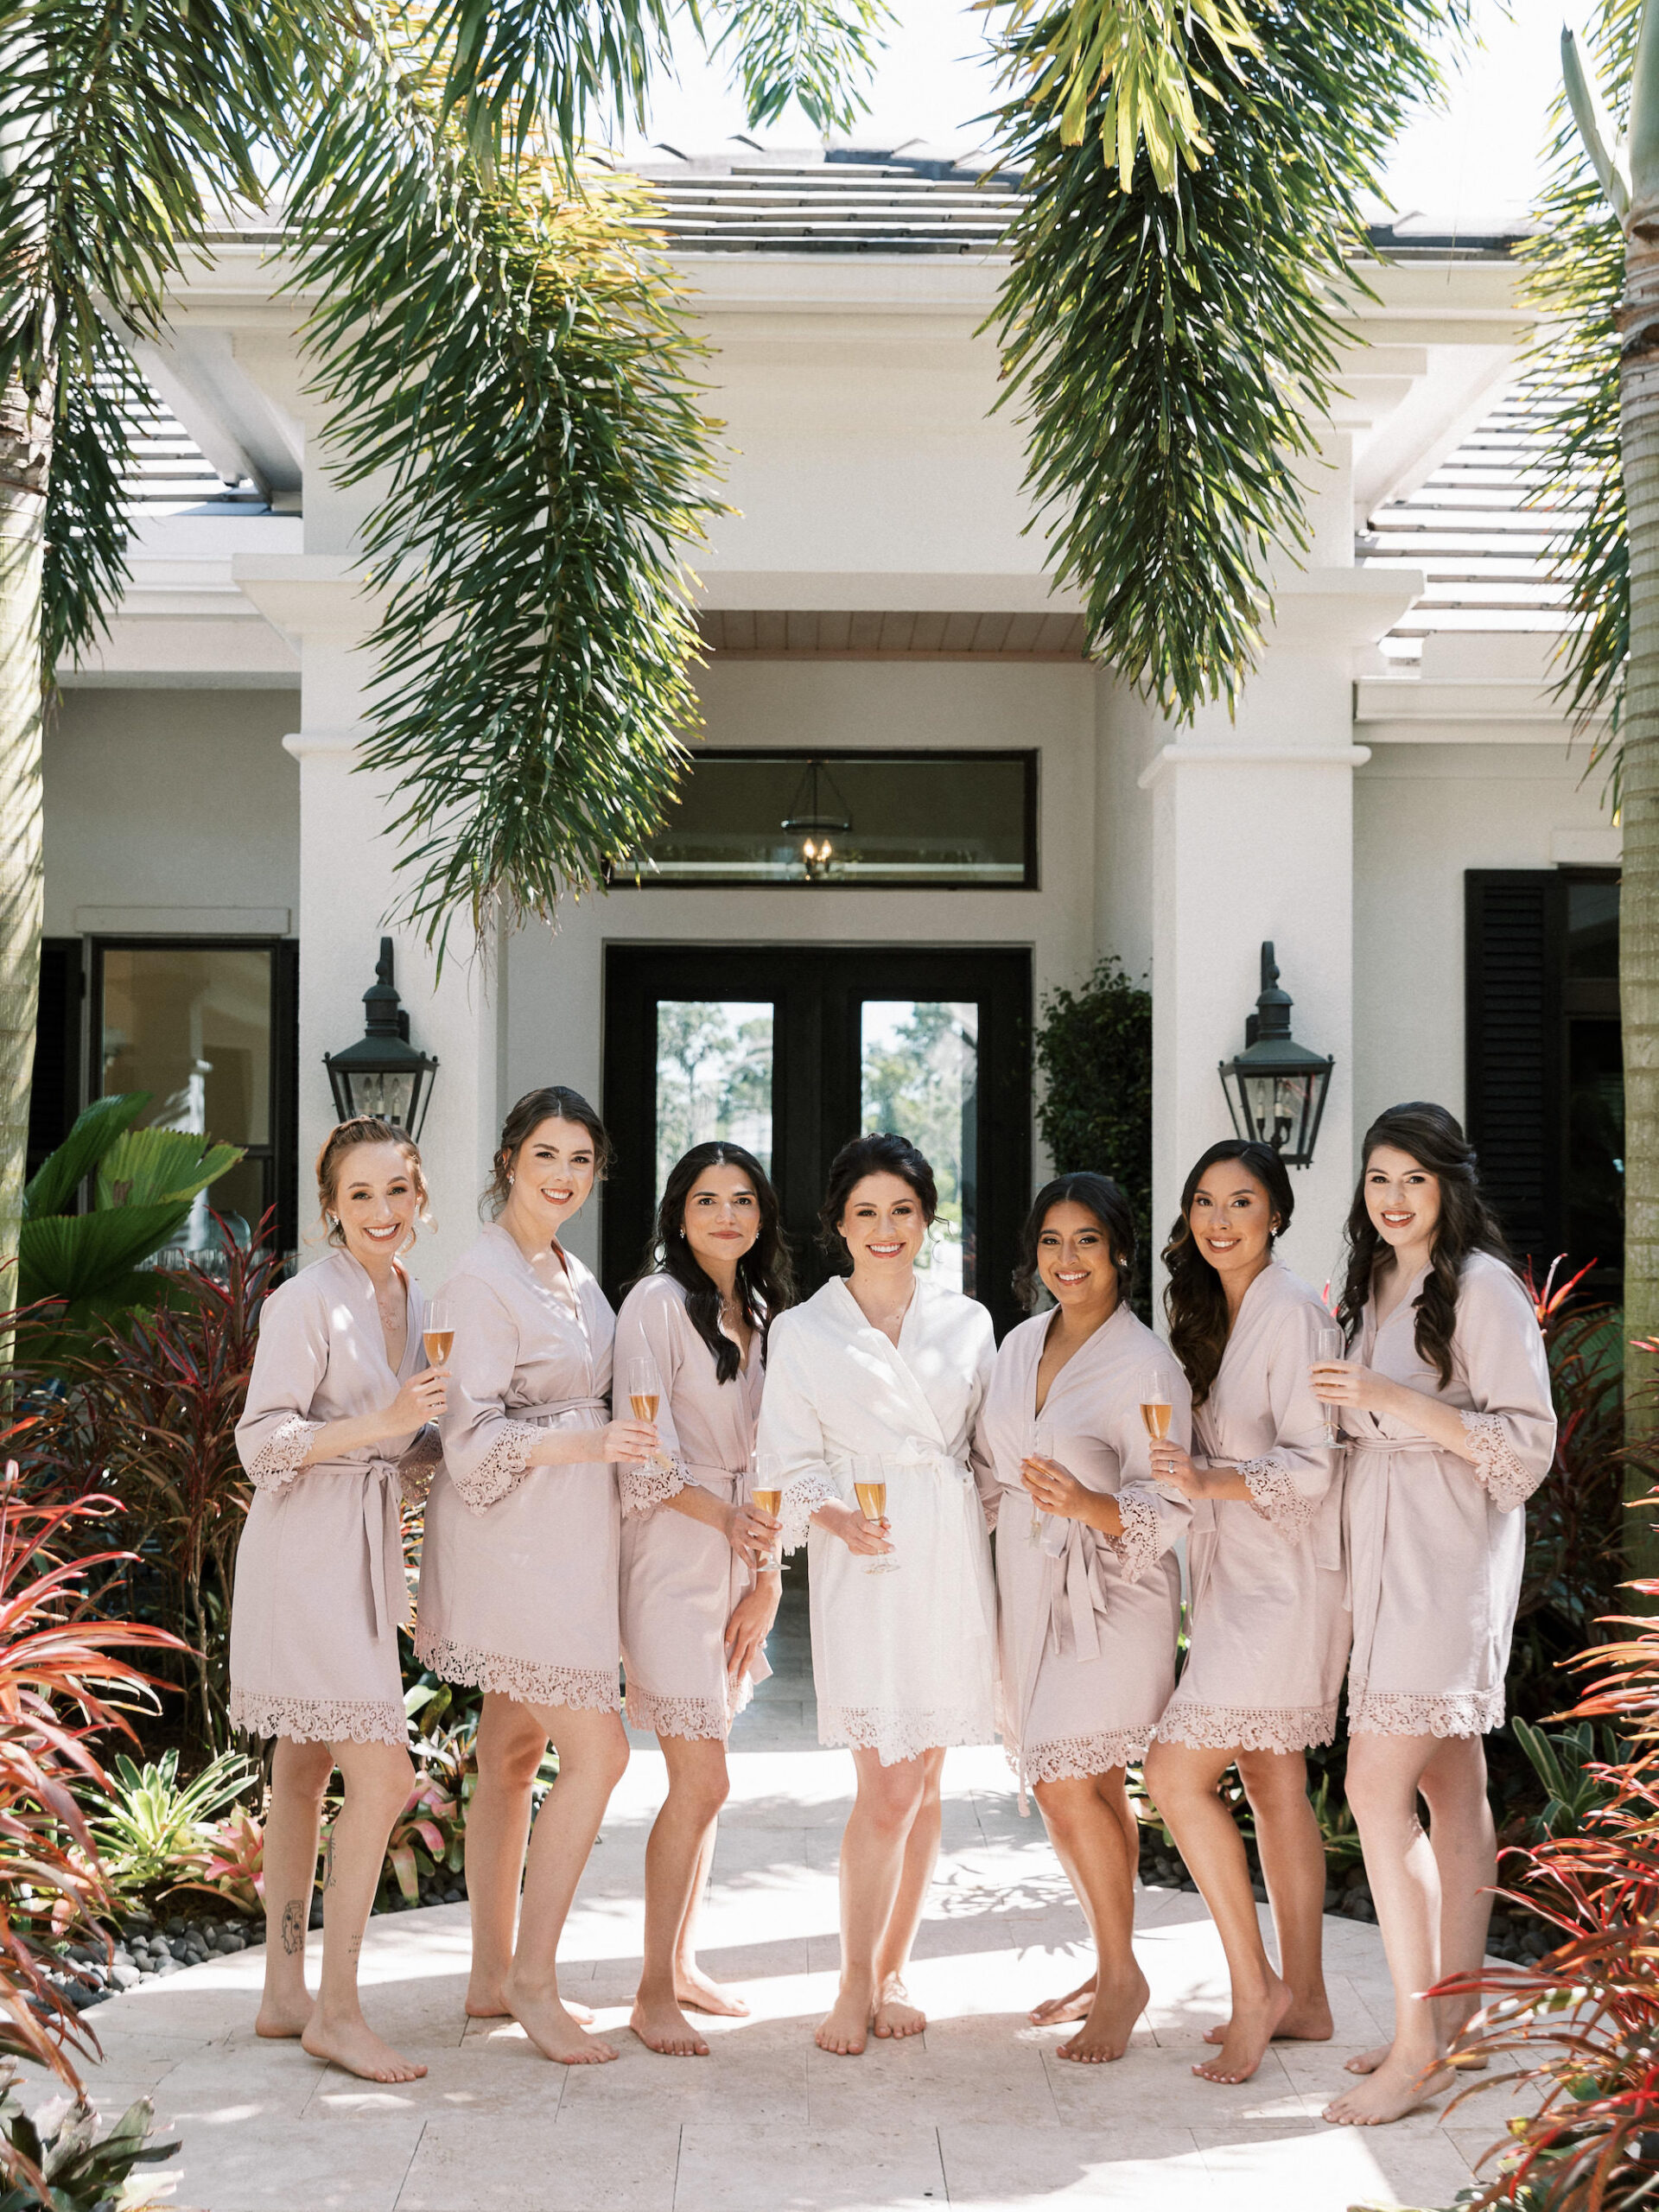 Old Florida Elegant Bride Getting Wedding Ready with Bridesmaids in Matching Taupe Robes | Tampa Wedding Venue Concession Golf Club